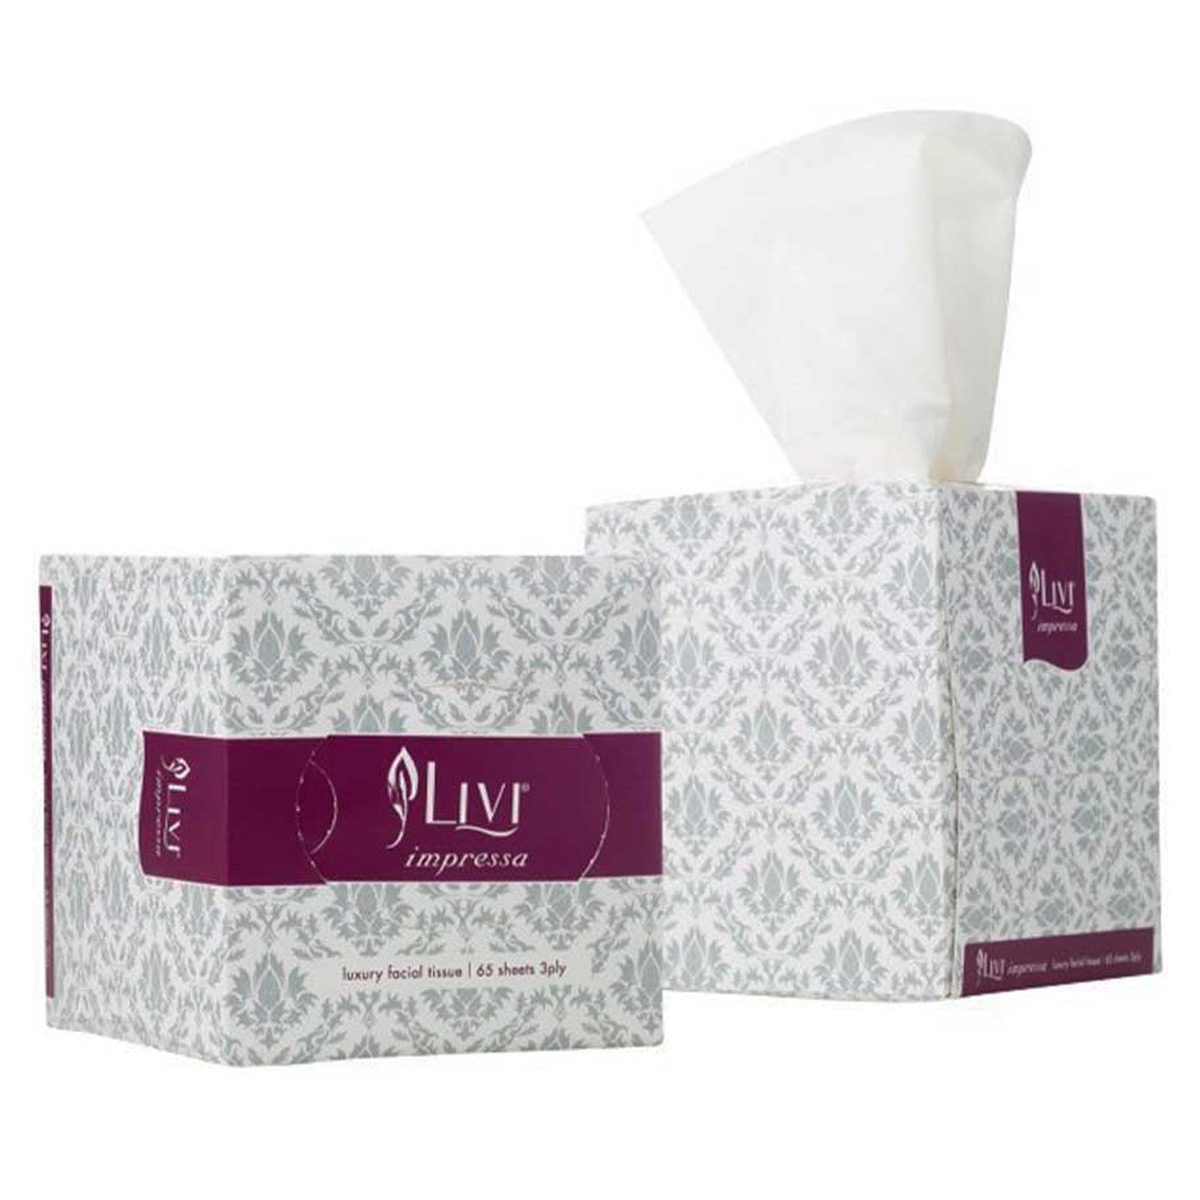 paper-products-facial-tissues-livi-impressa-cube-3-ply-facial-tissue-single-super-soft-thick-luxurious-stylish-cube-convenience-gentle-on-skin-hypoallergenic-vjs-distributors-3301S